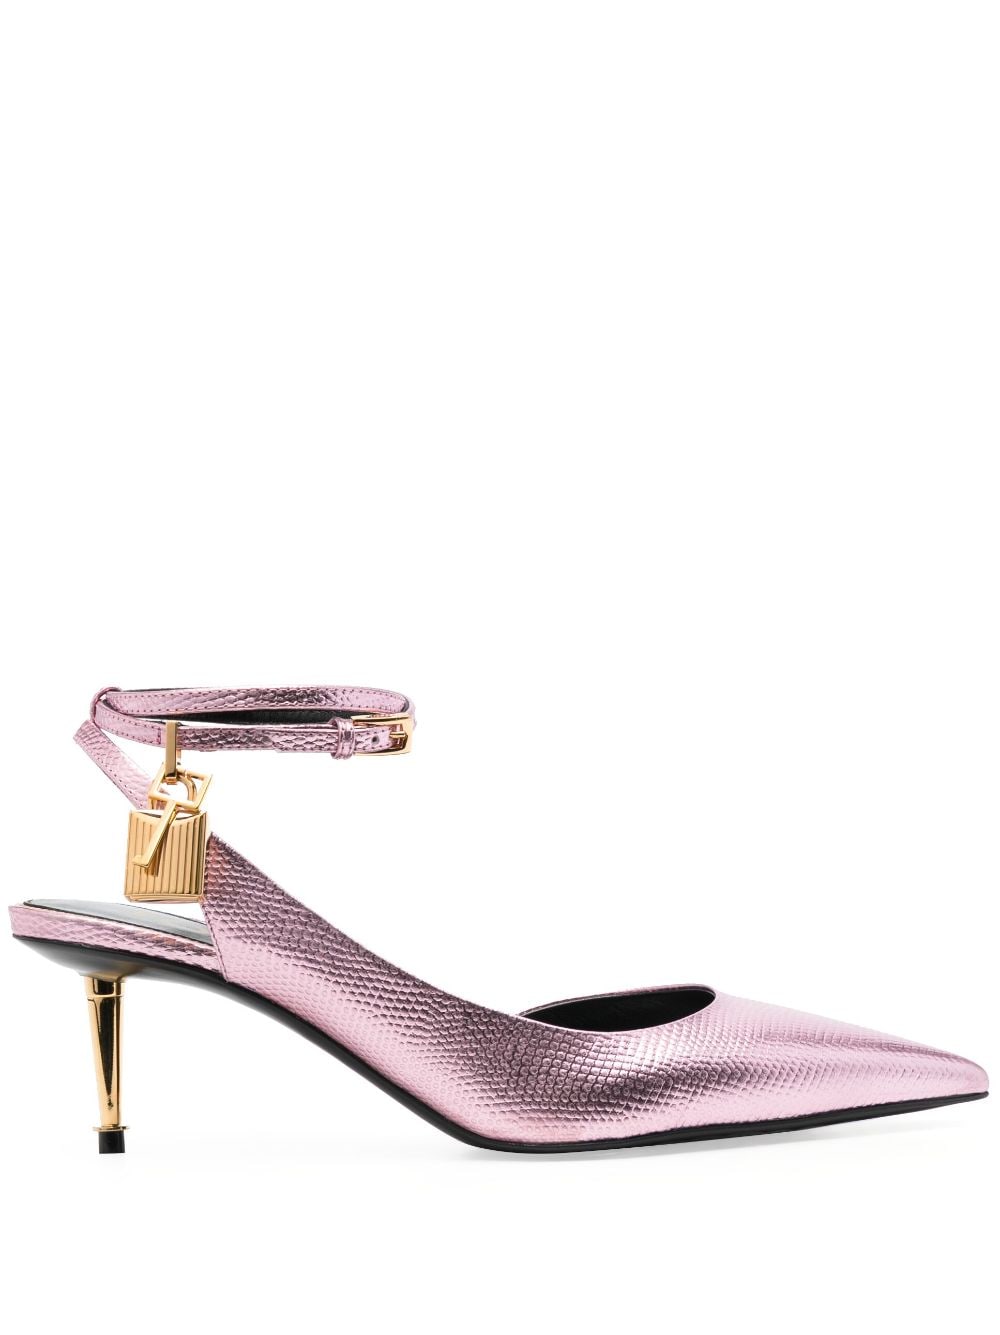 TOM FORD POINTED-TOE LEATHER PUMPS